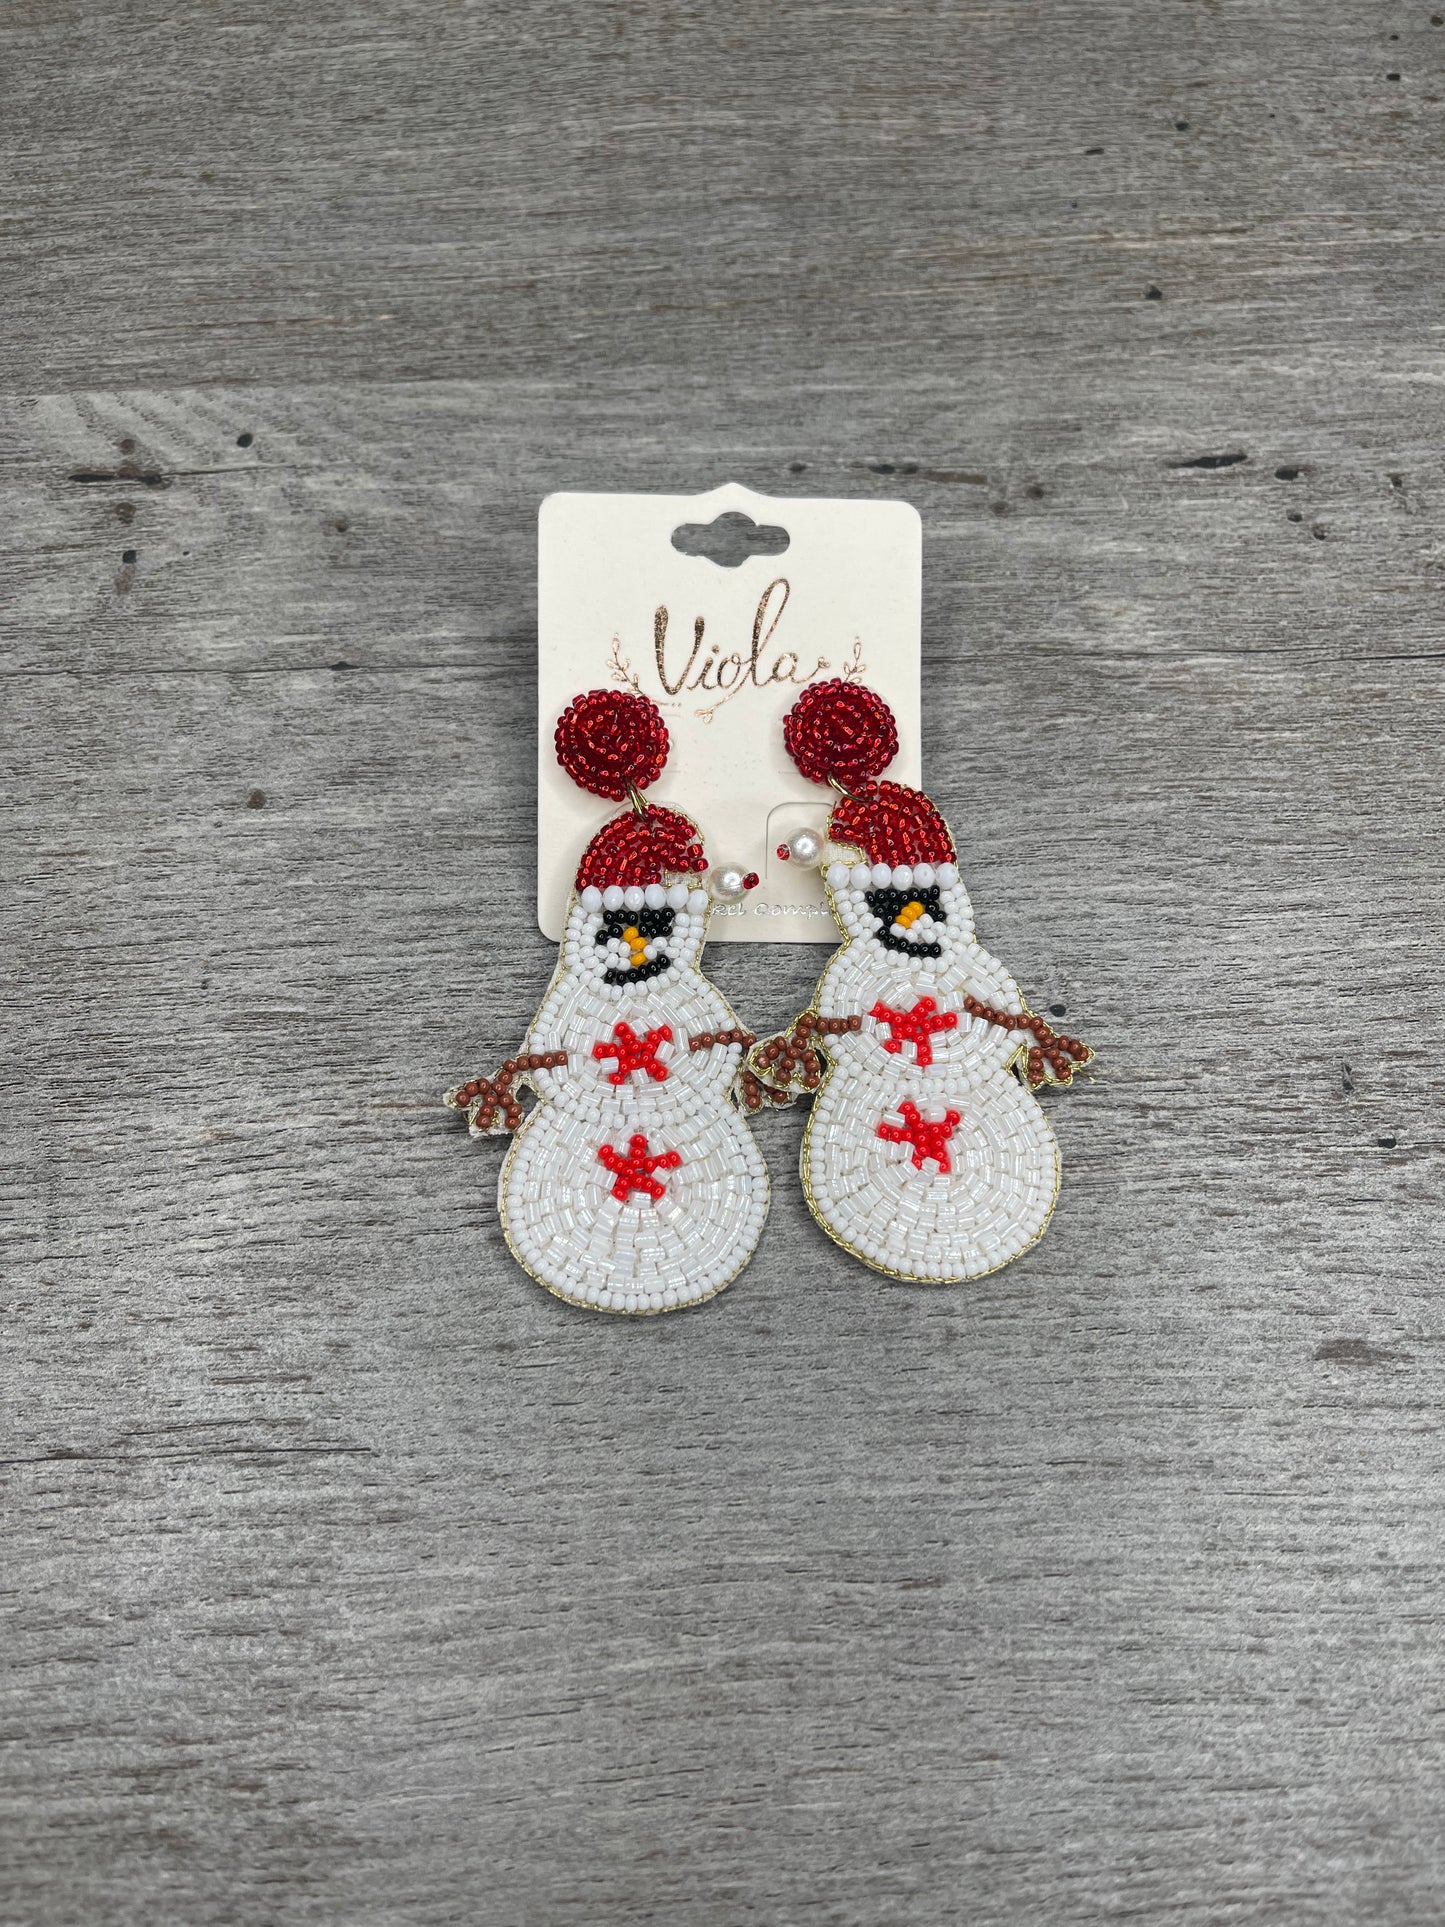 The Weather Outside is Frightful, But The Fire is So Delightful Earrings